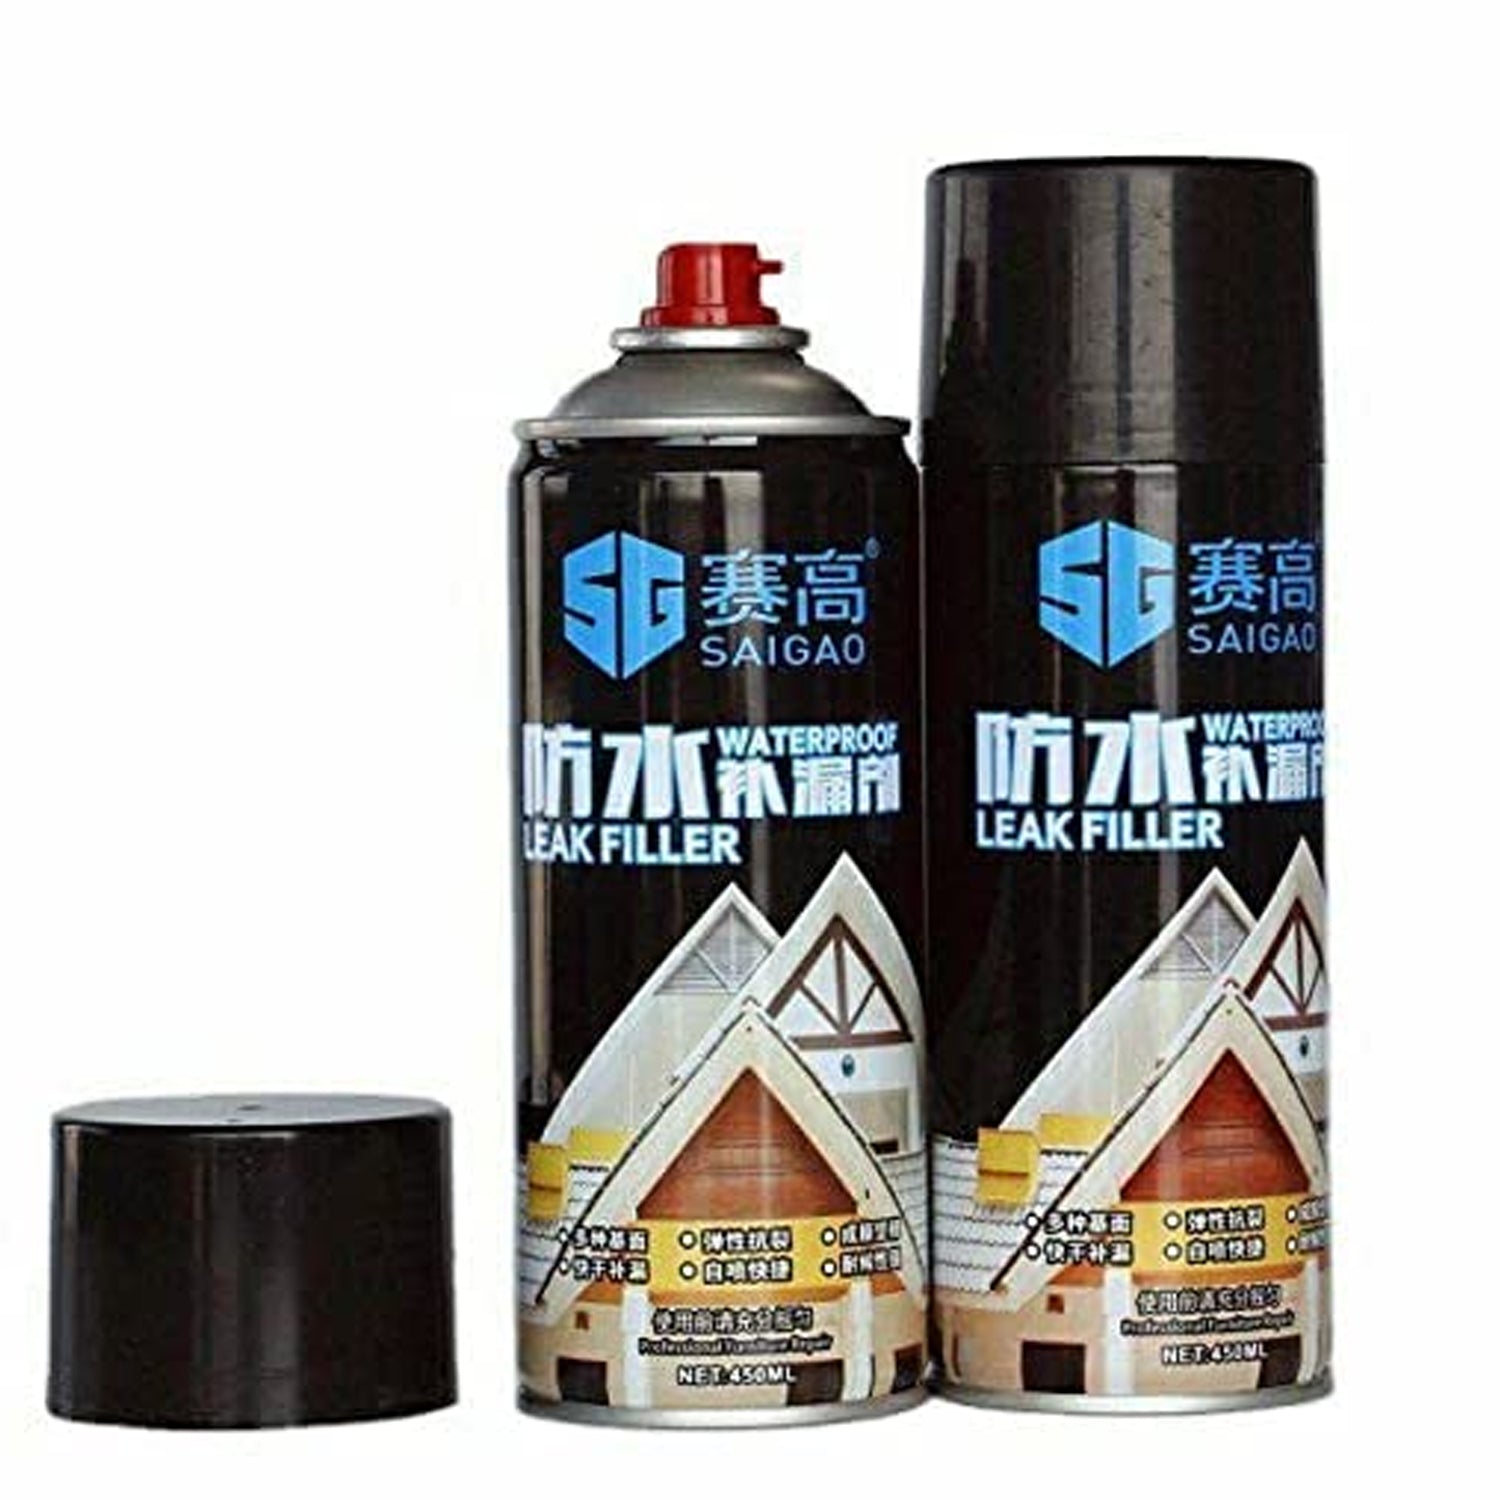 1332 Waterproof Leak Filler Spray Rubber Flexx Repair & Sealant - Point to Seal Cracks Holes Leaks Corrosion More for Indoor Or Outdoor Use Black Paint (450 Ml) DeoDap